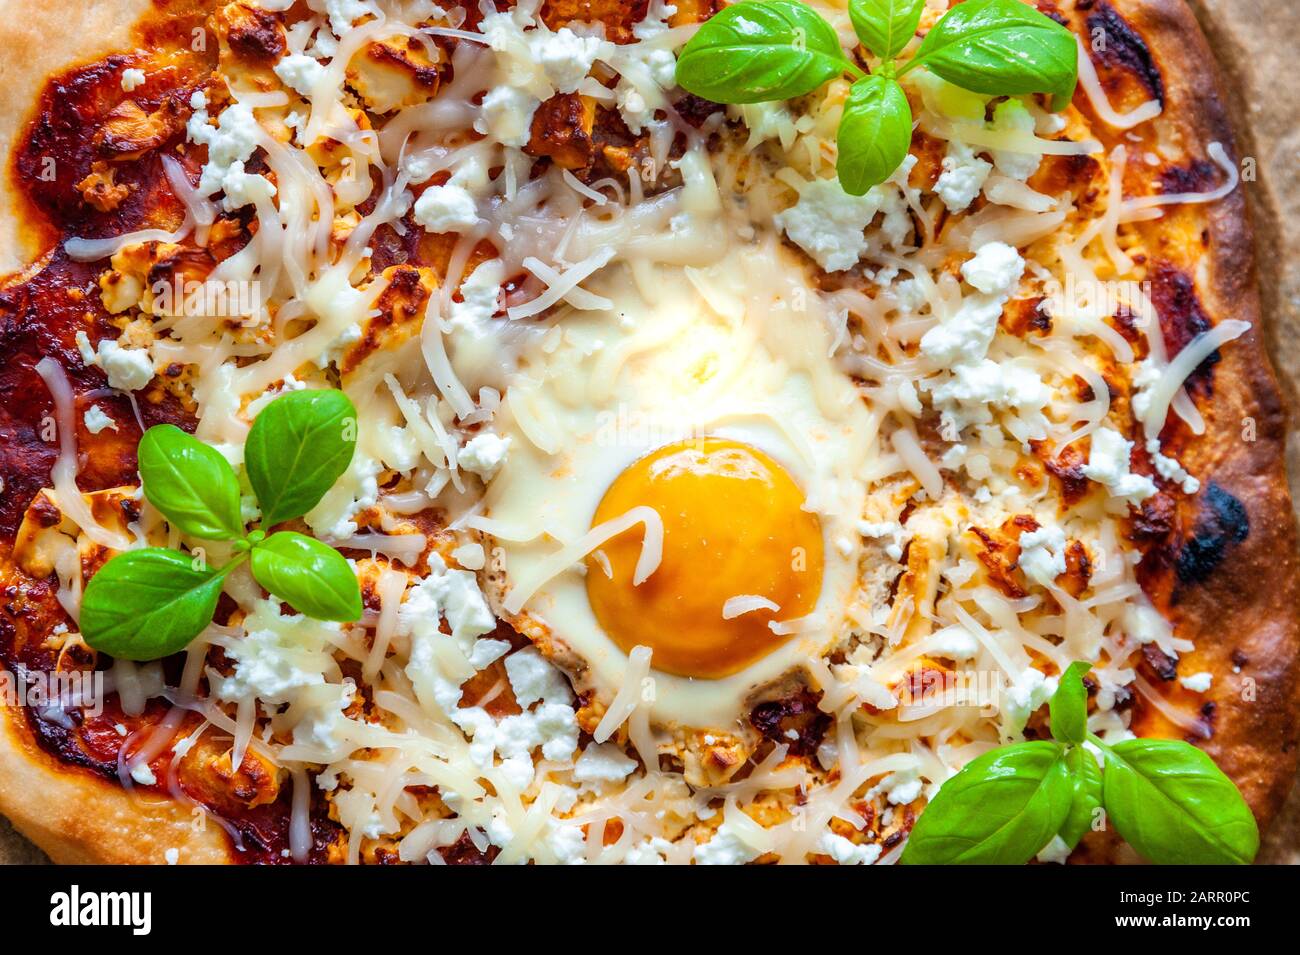 Close up shot of a pizza with egg, cheese and herbs. Rustic scene and dramatic light. Stock Photo